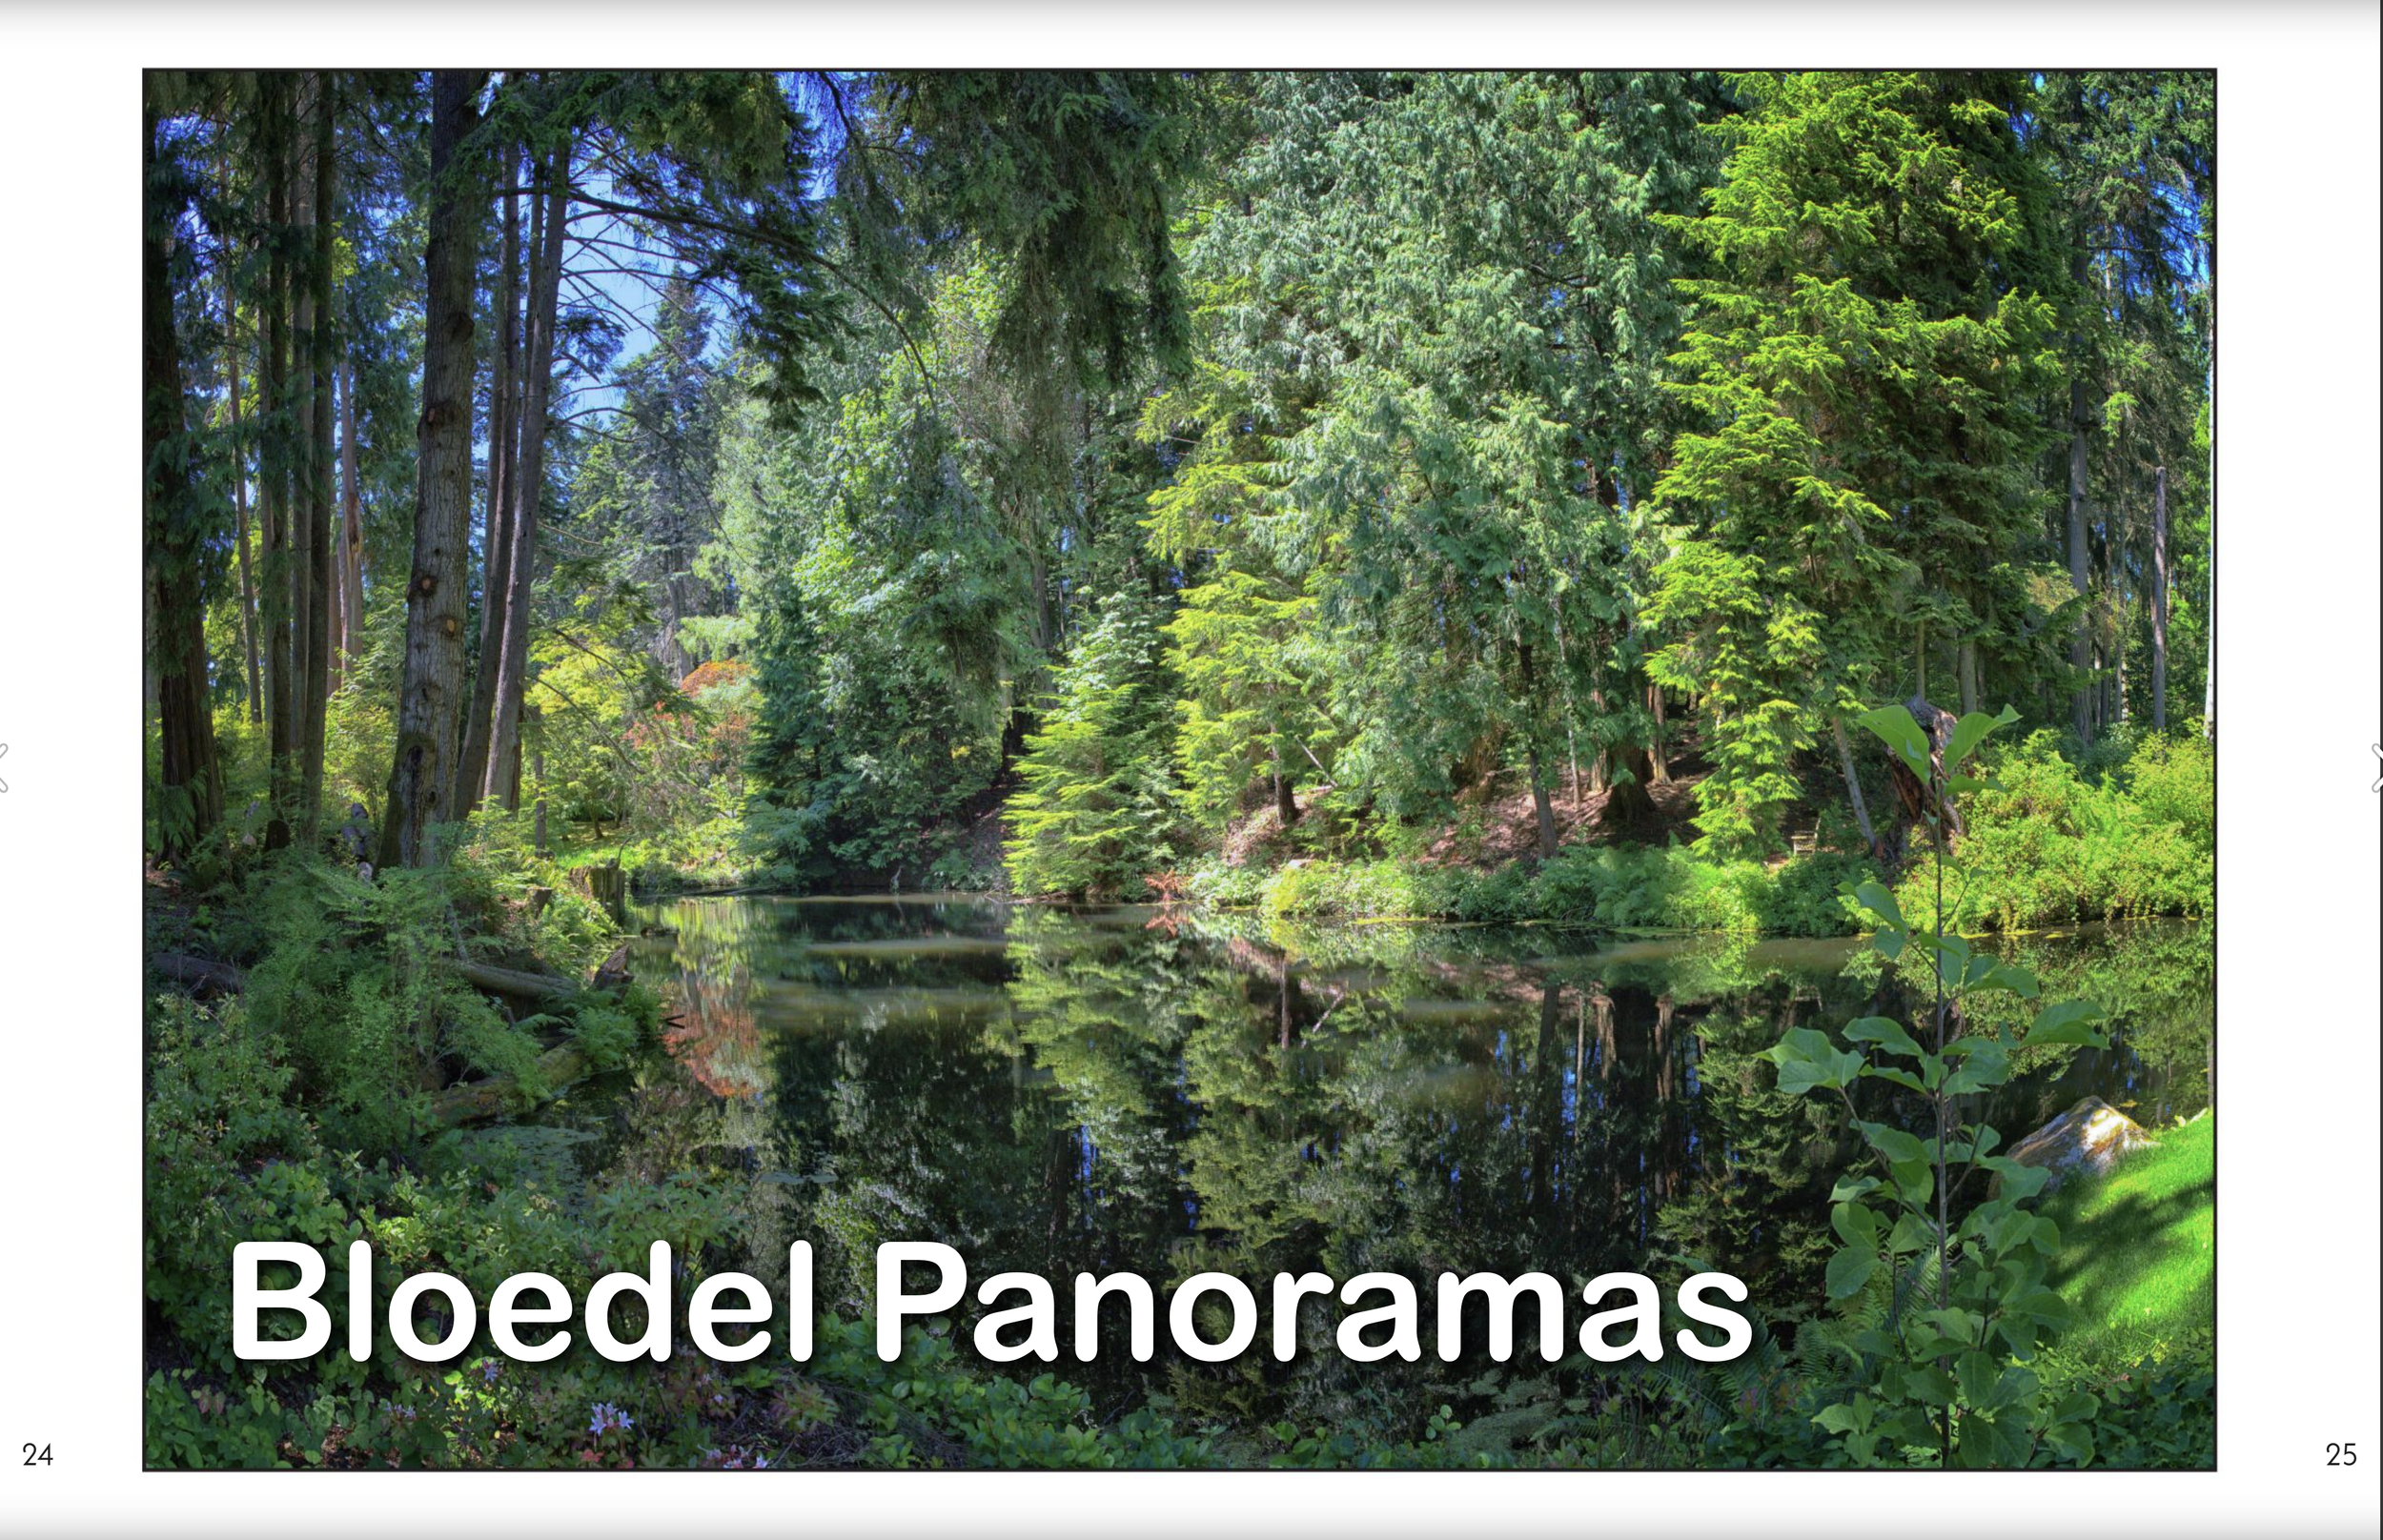 Bloedel_Panoramas_spread_title.png